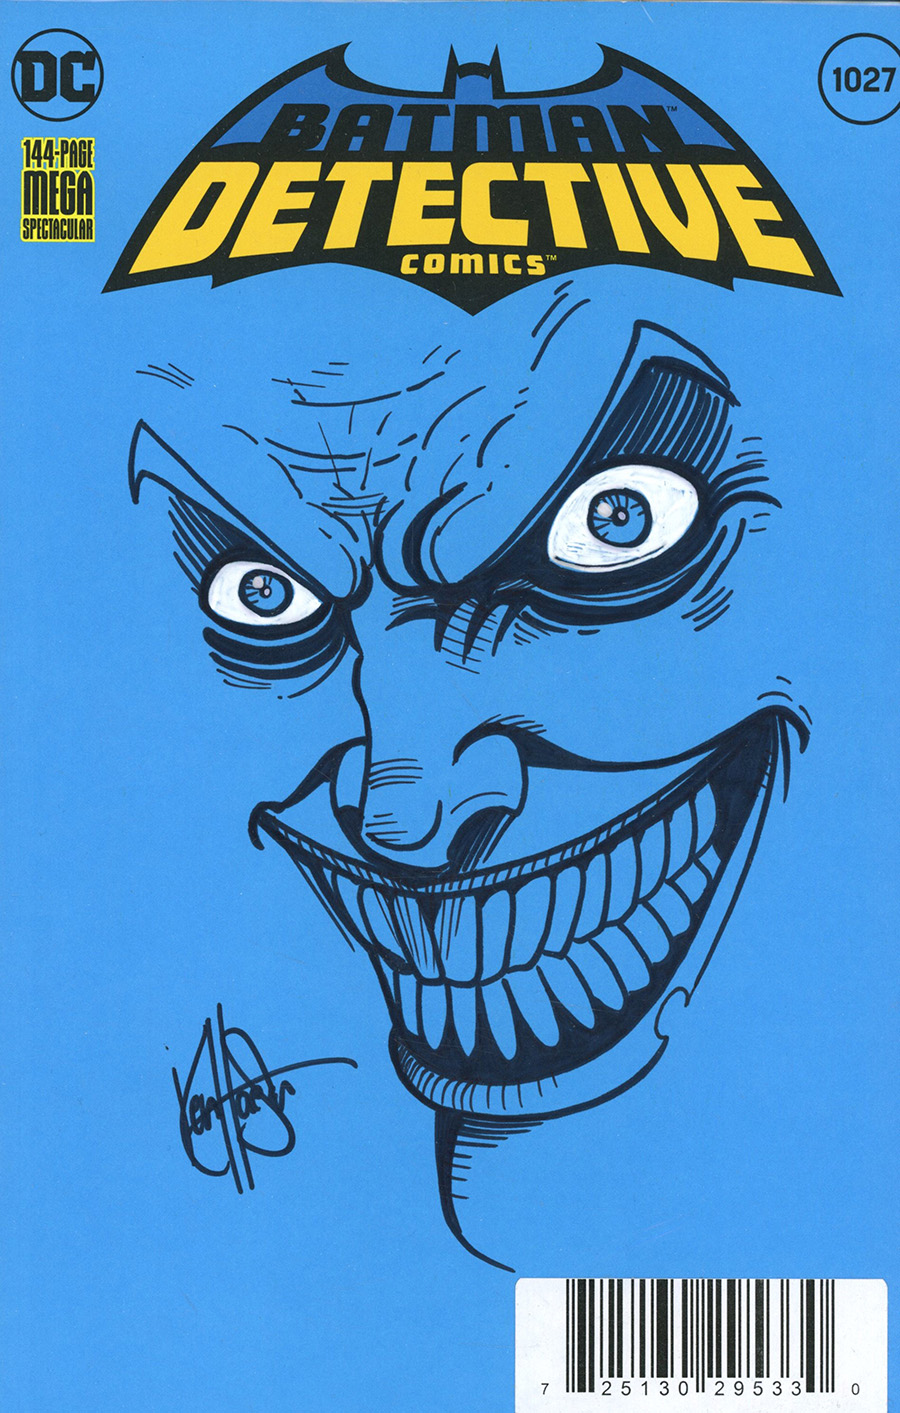 Detective Comics Vol 2 #1027 Cover R DF Signed & Remarked With A Joker Hand-Drawn Sketch By Ken Haeser